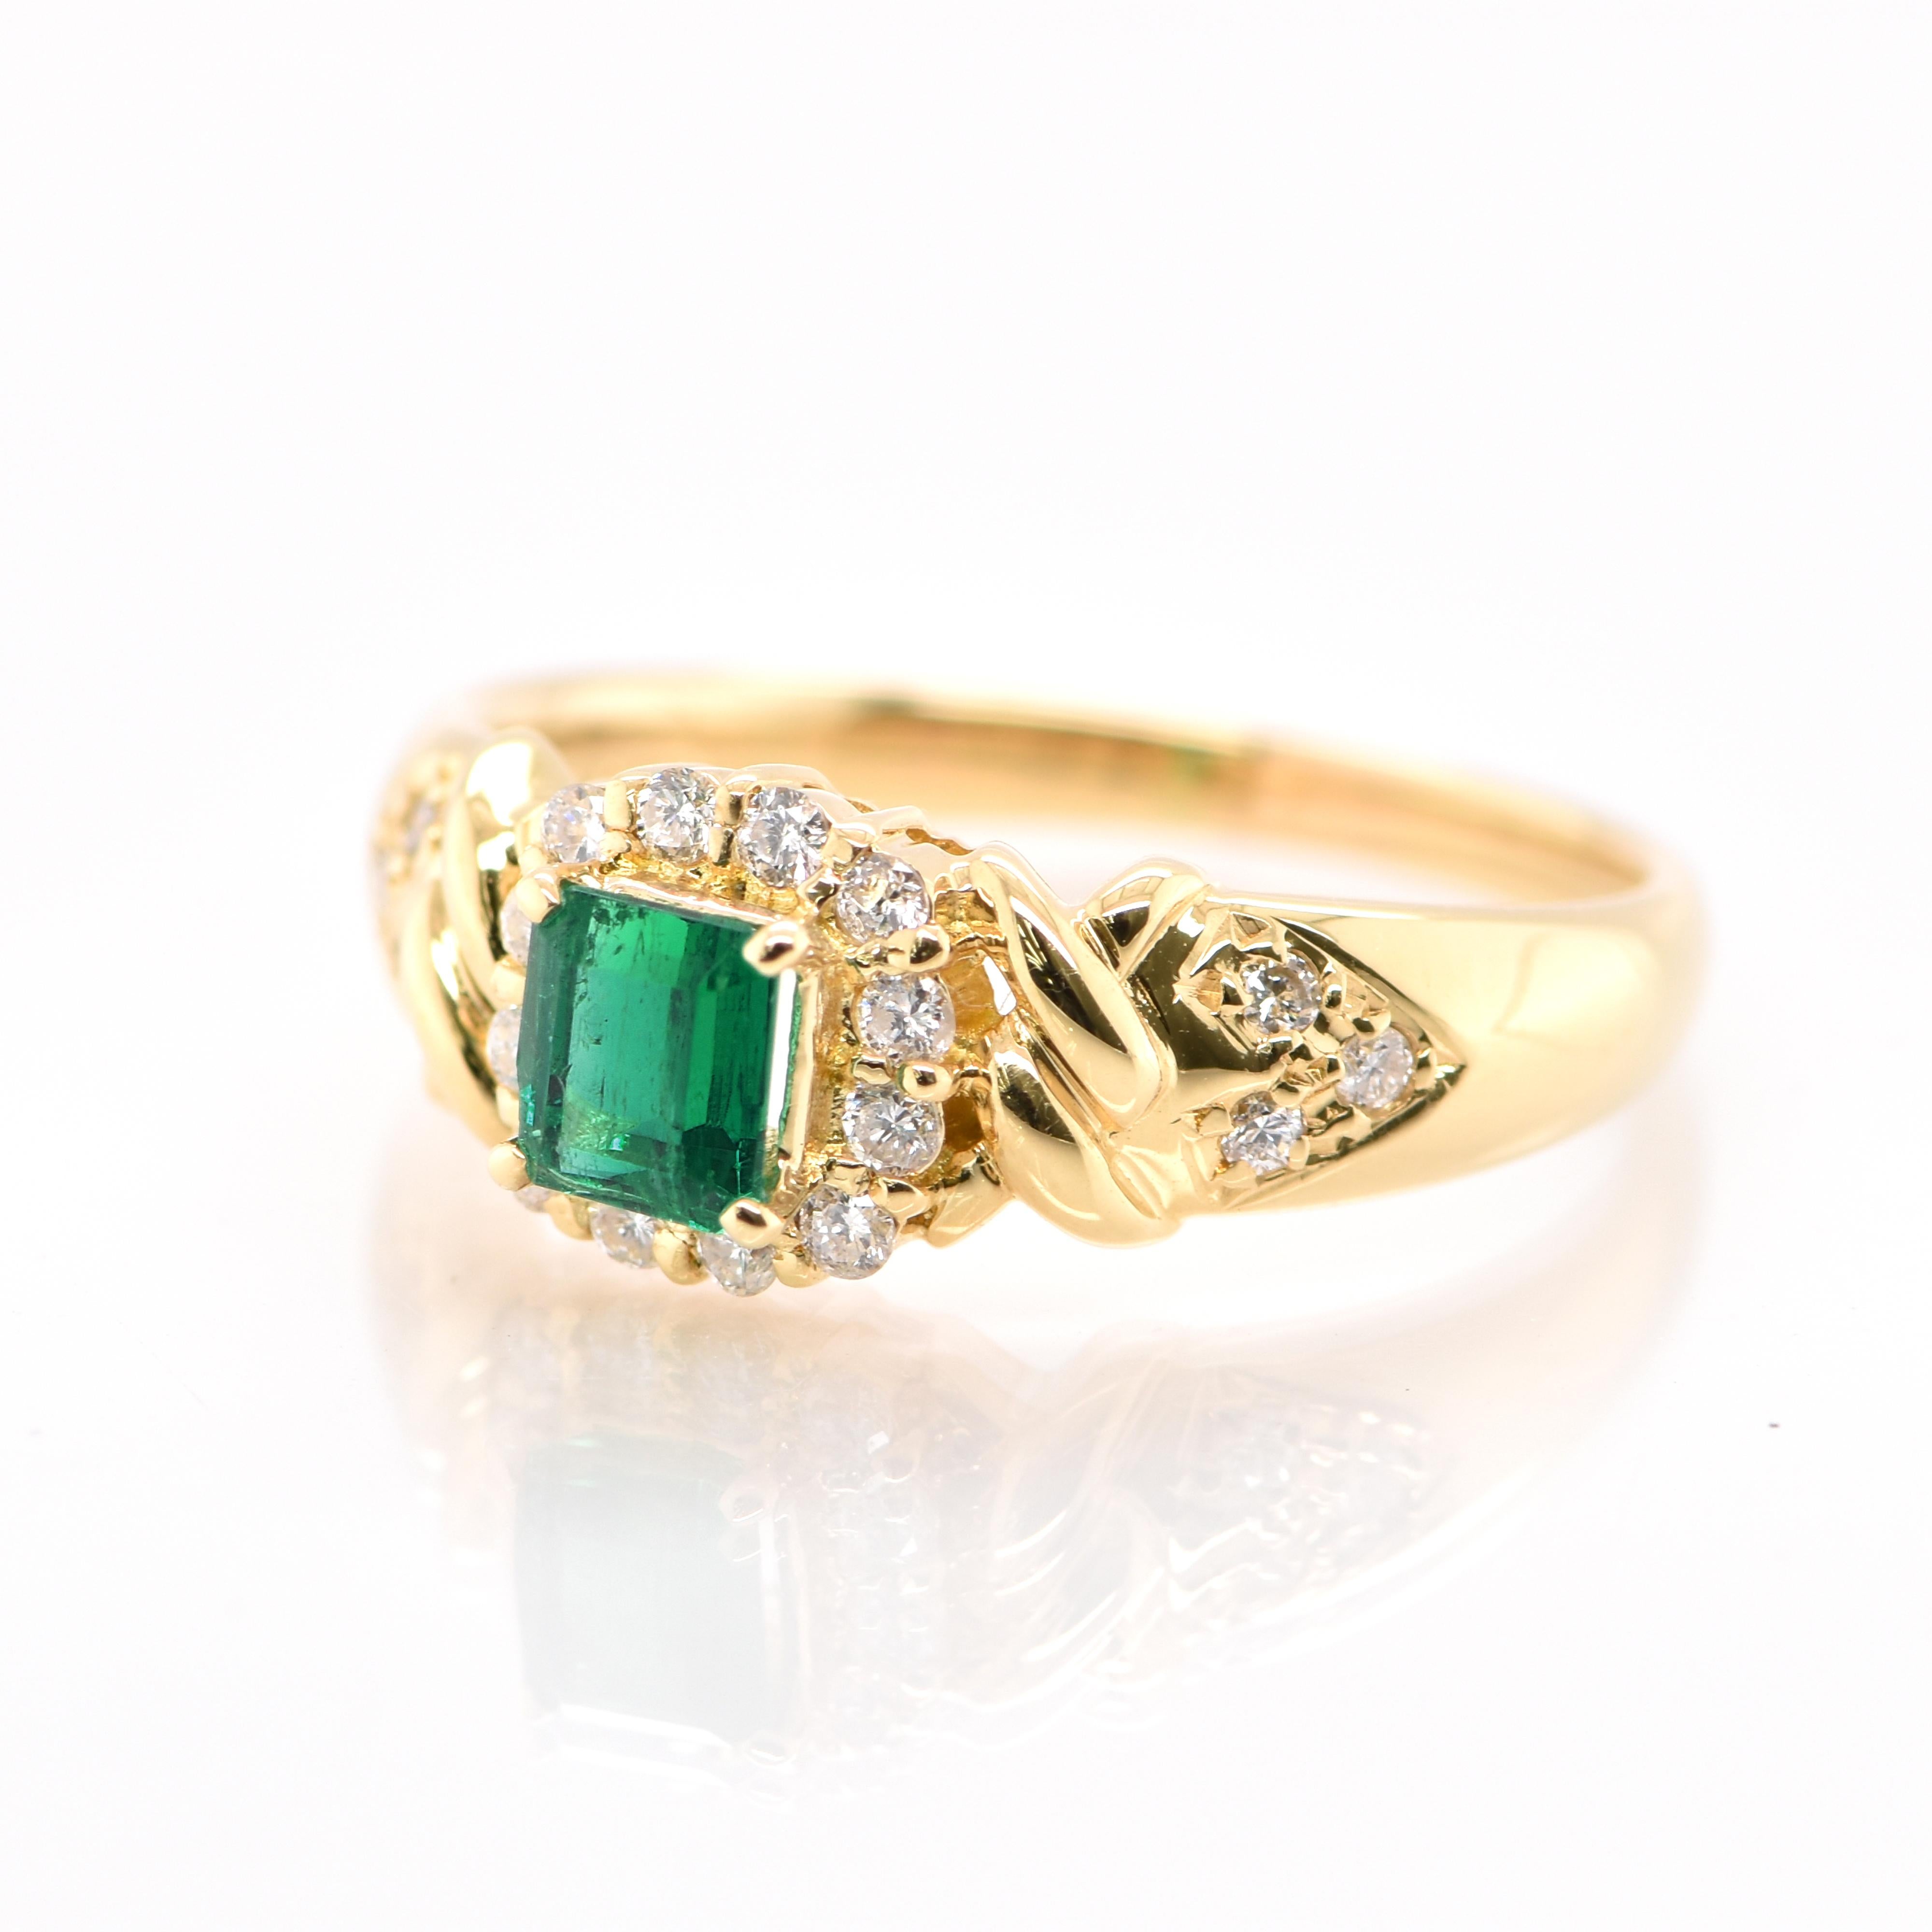 A stunning Engagement Ring featuring a 0.44 Carat Natural Emerald and 0.23 Carats of Diamond Accents set in 18 Karat Yellow Gold. People have admired emerald’s green for thousands of years. Emeralds have always been associated with the lushest